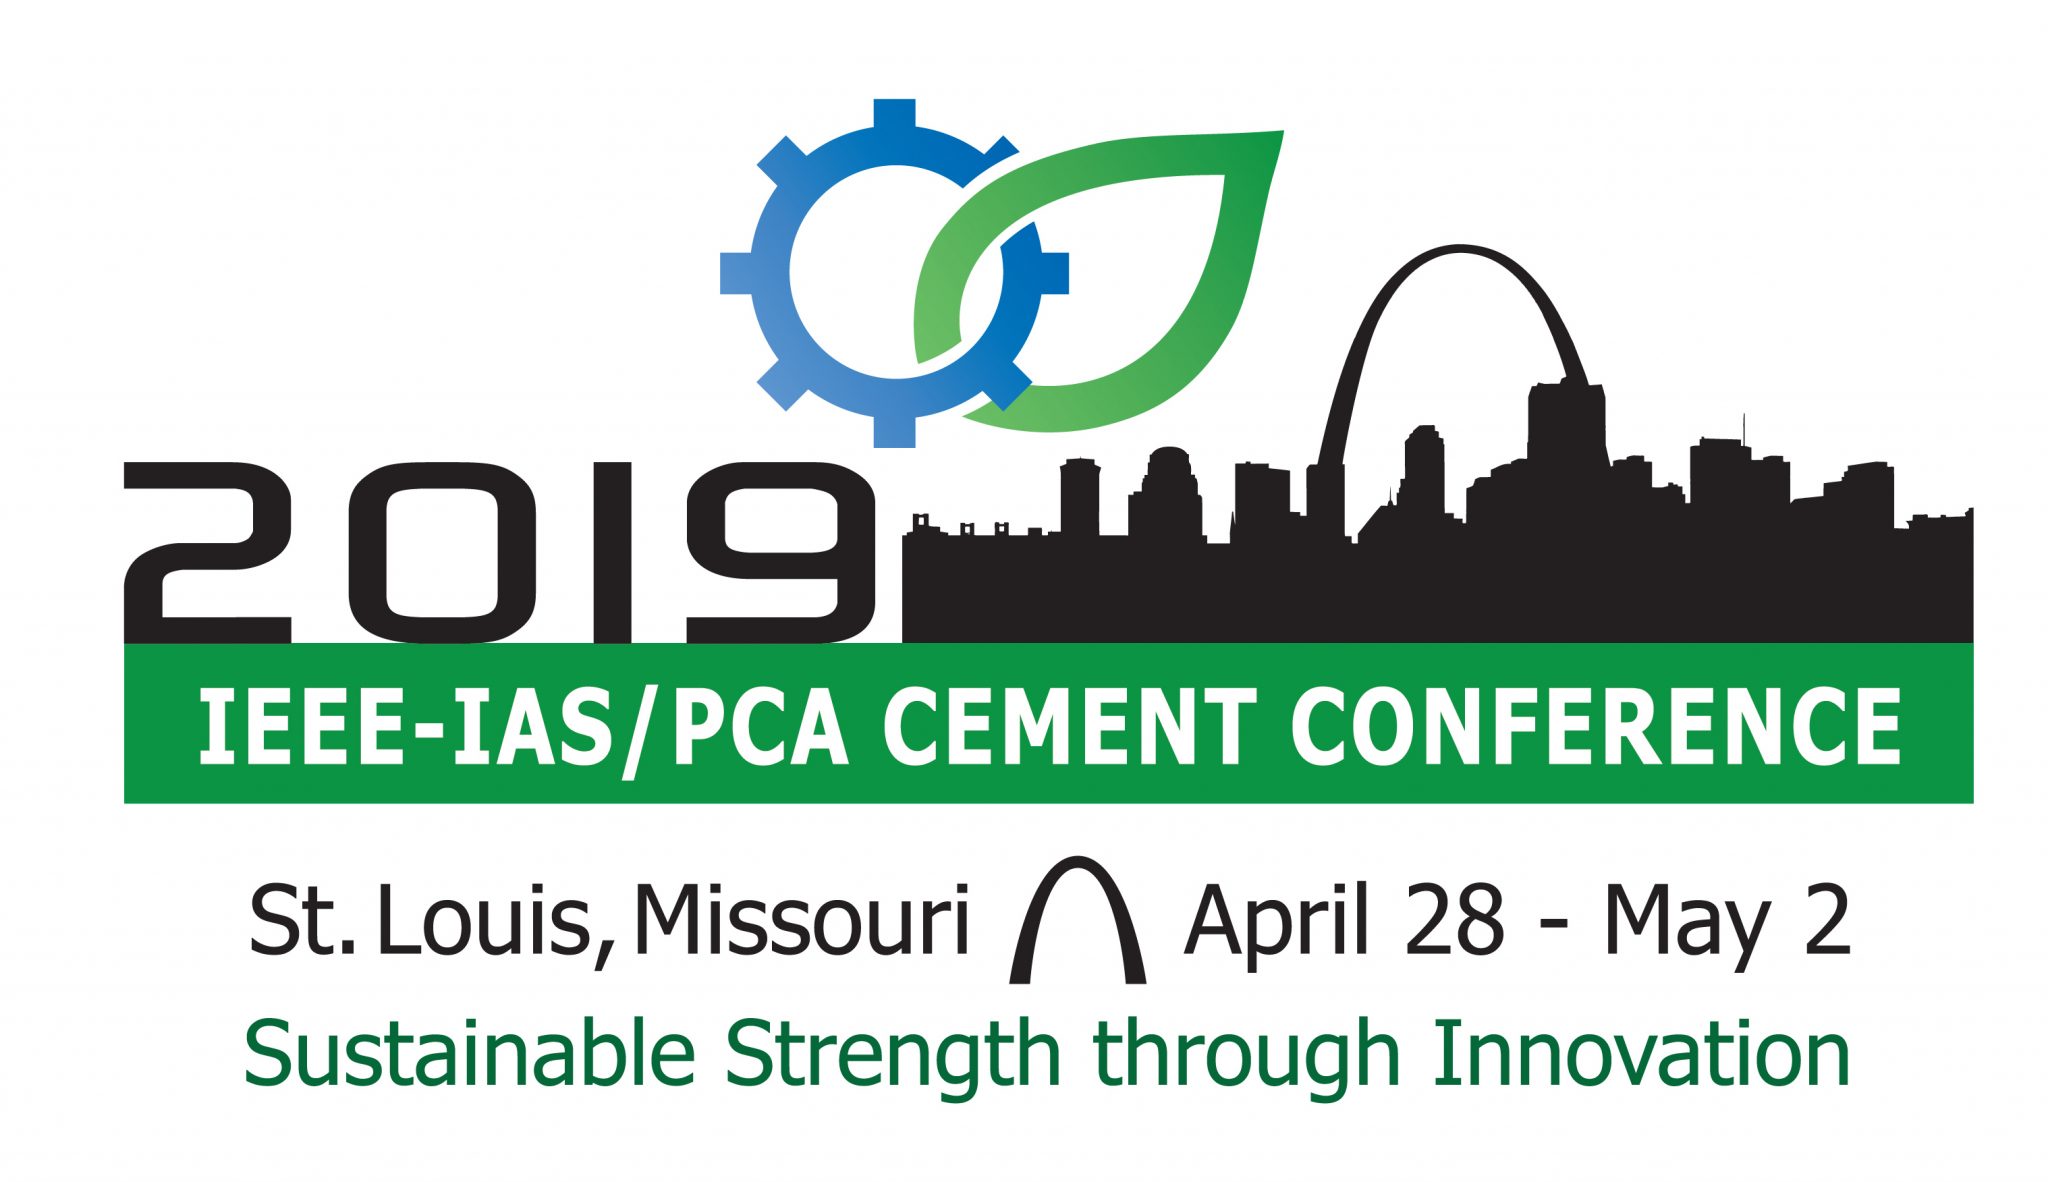 IEEEIAS/PCA Conference to Convene in St. Louis Cement Products